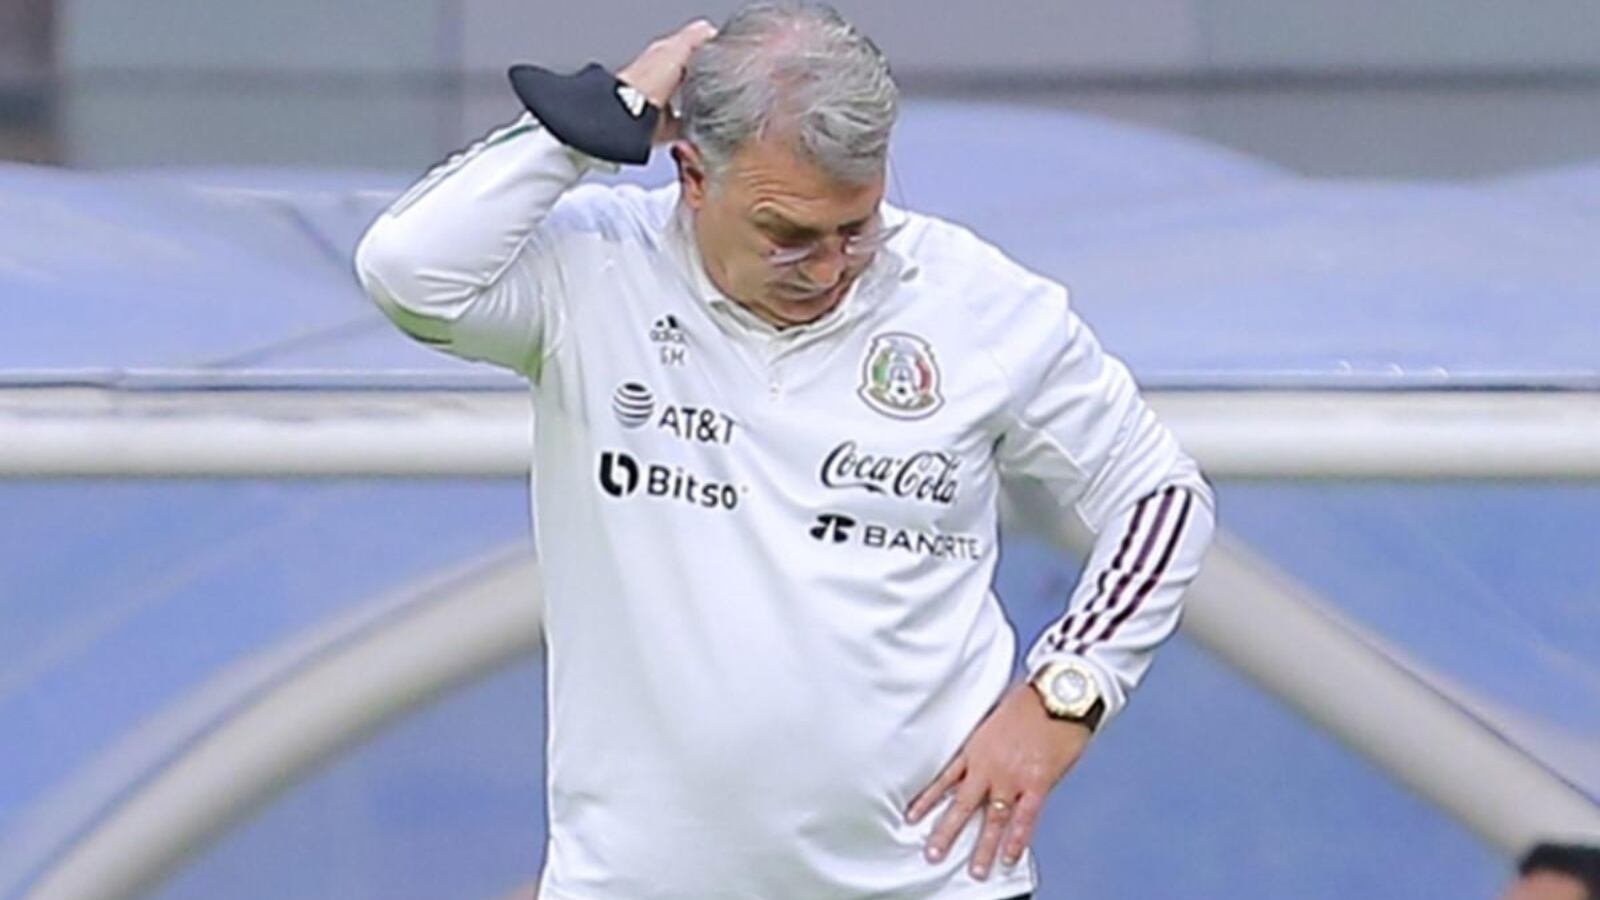 He is going to be the first one to leave Mexico National Team and it’s not Gerardo Martino